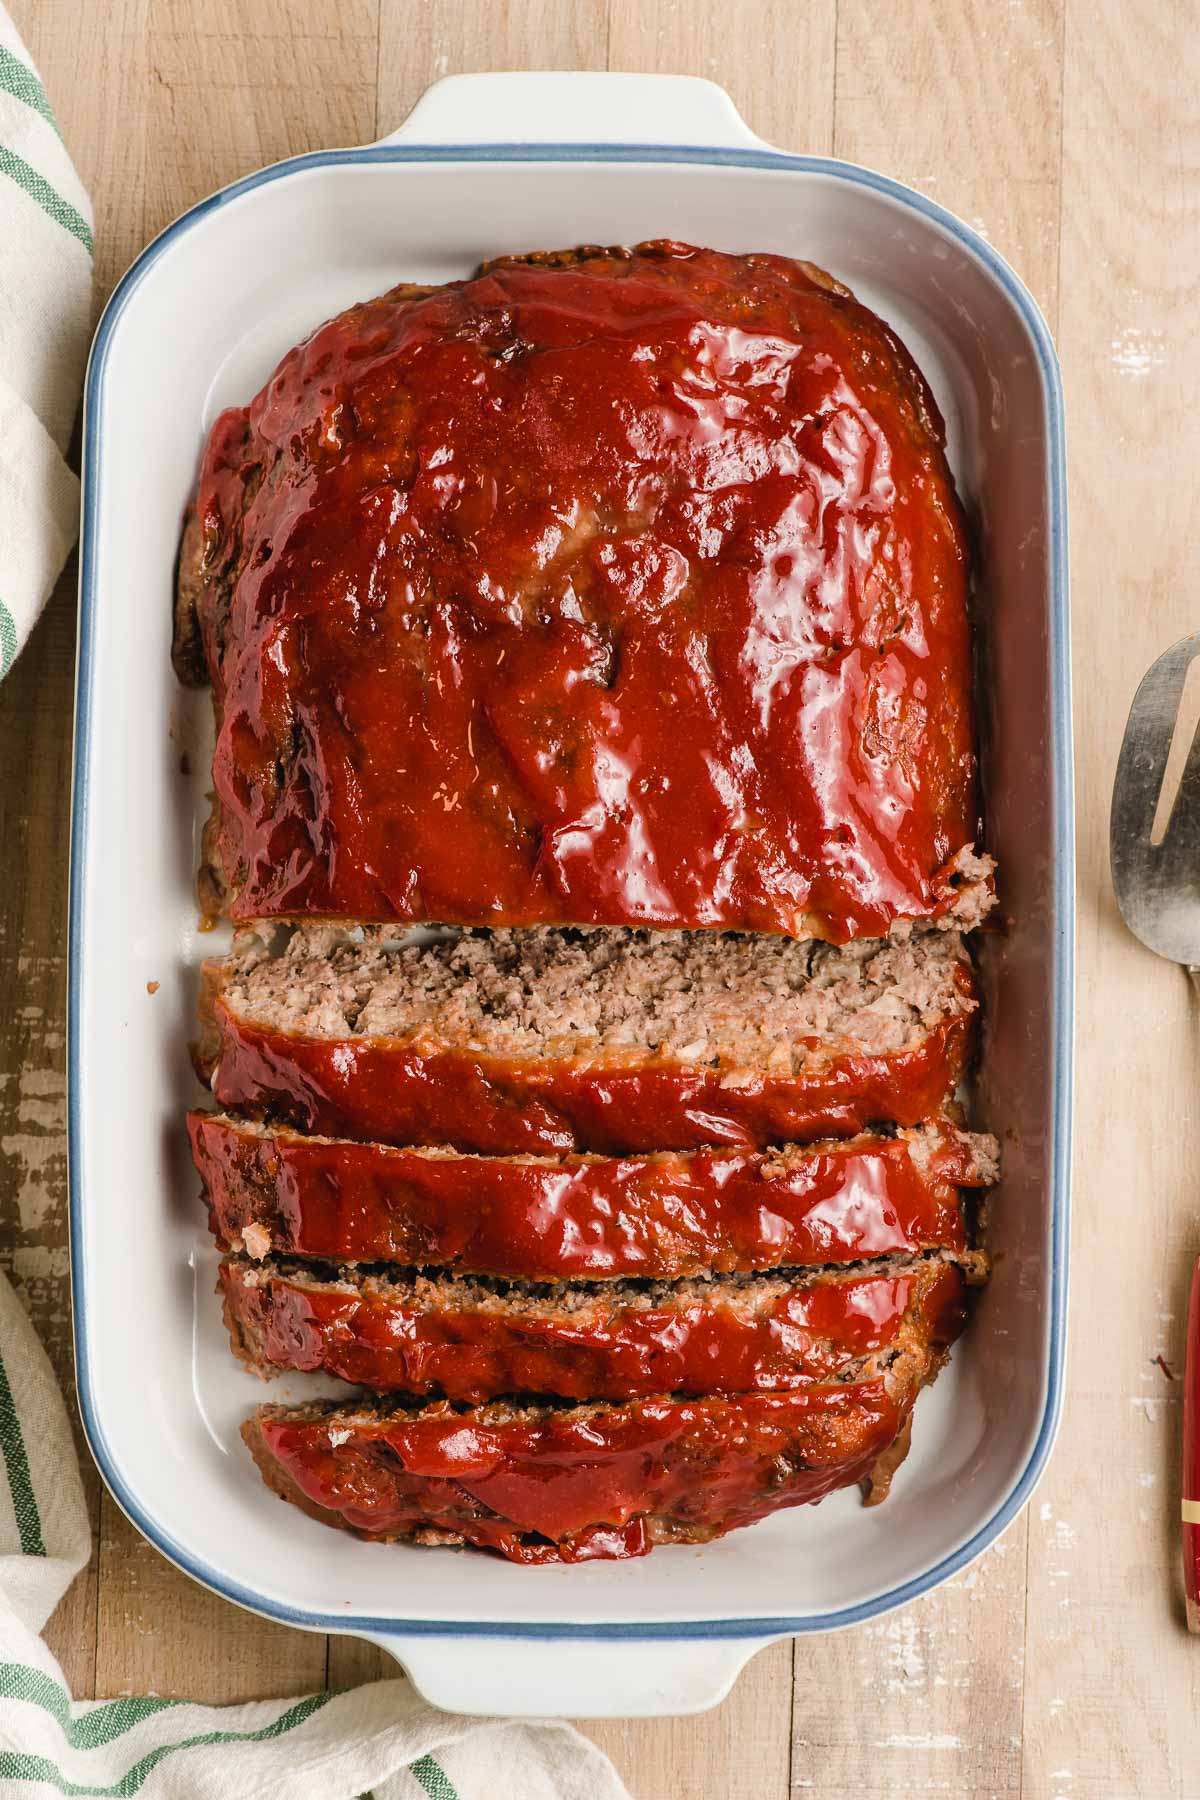 White casserole dish with a ketchup glazed meatloaf inside, half of it sliced and half whole.